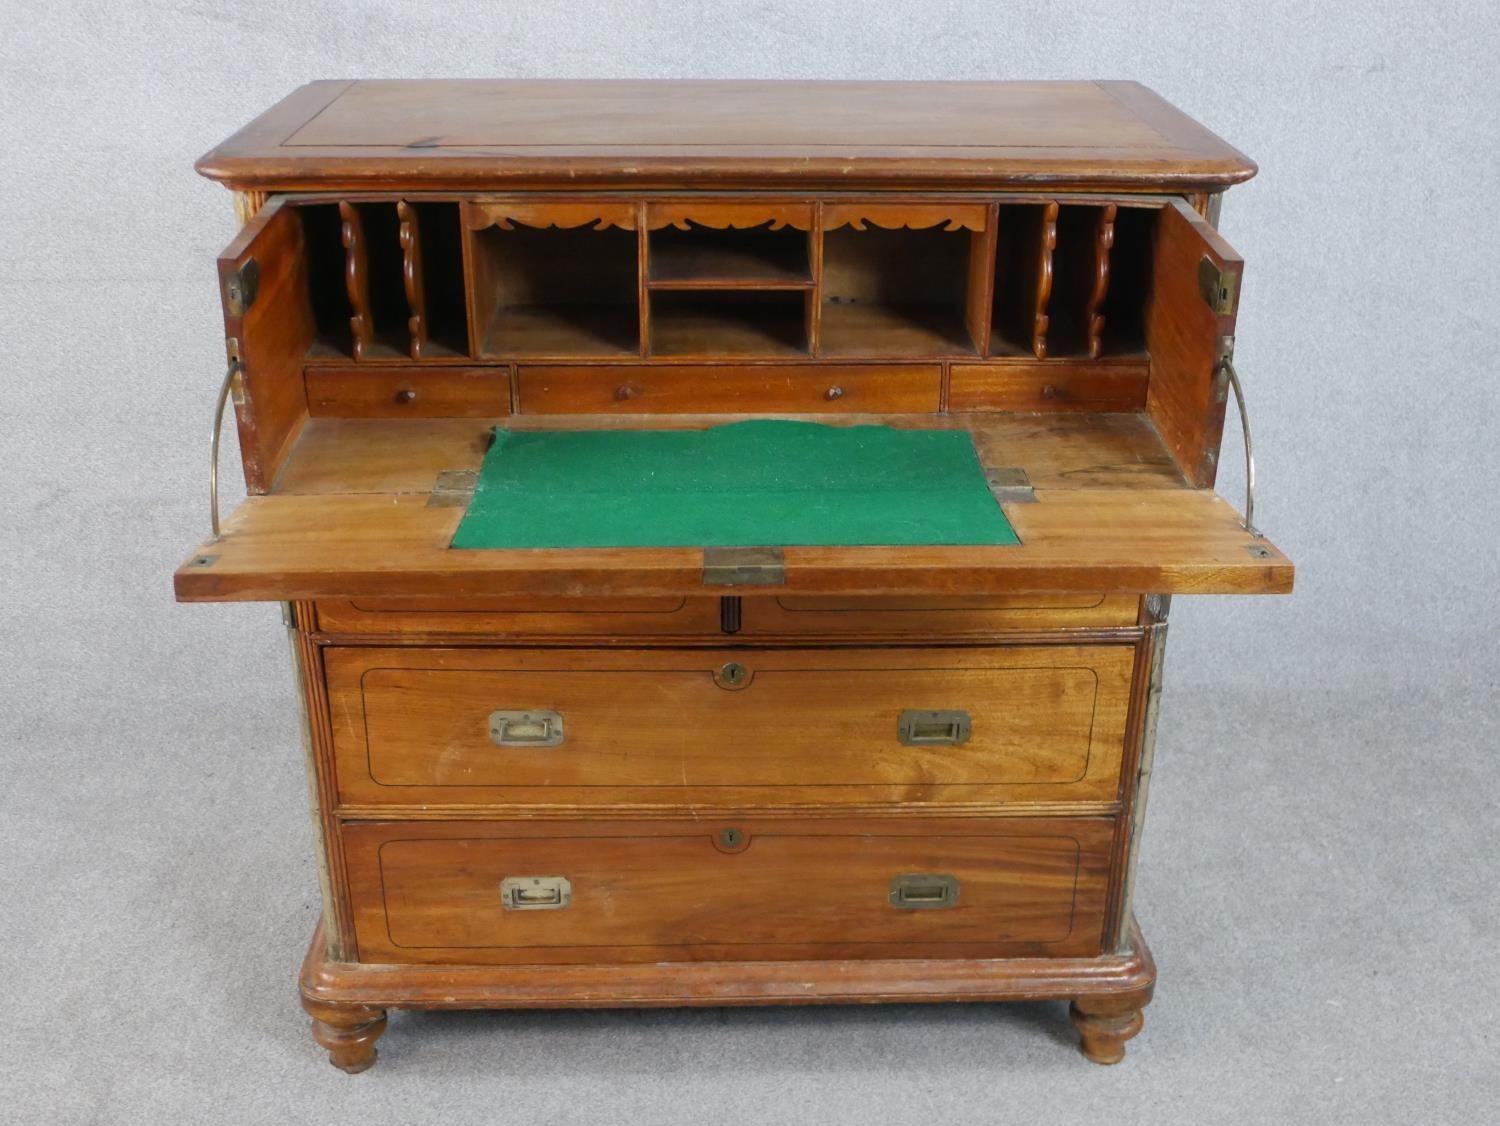 A 19th century camphorwood secretaire campaign chest, in two sections, with a secretaire drawer - Image 5 of 9